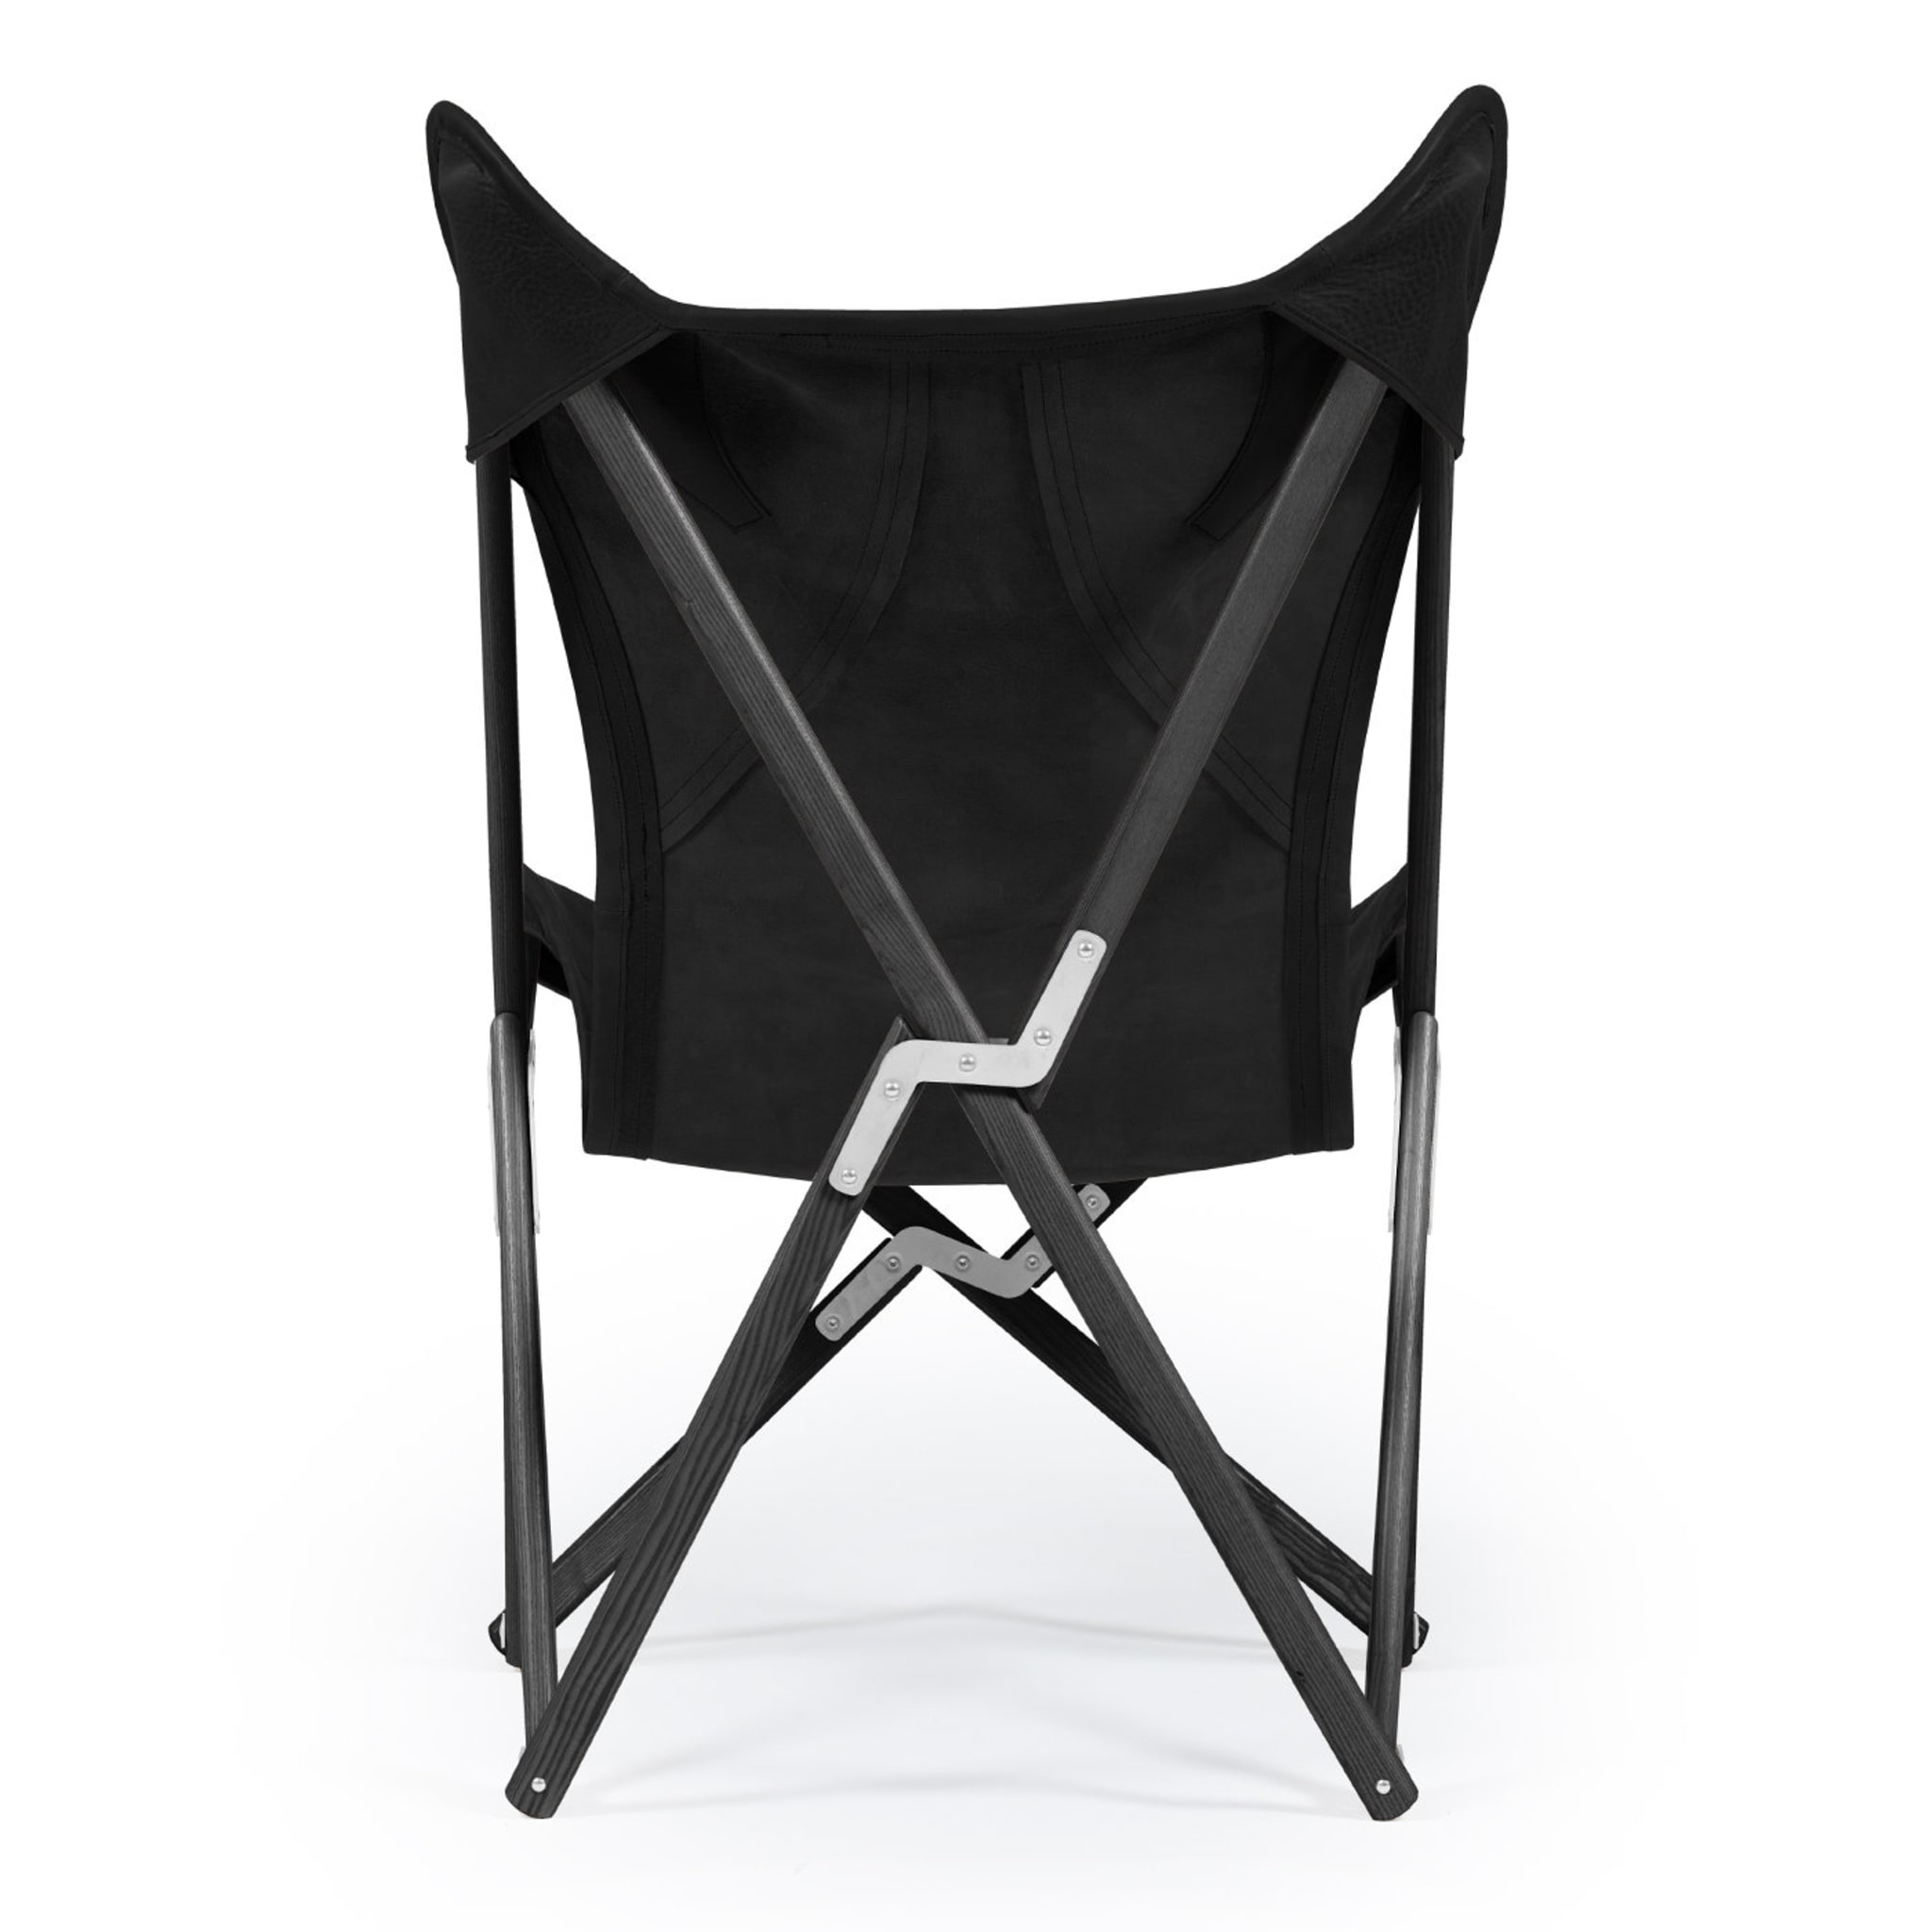 Tripolina Armchair in Black Leather - Alternative view 2